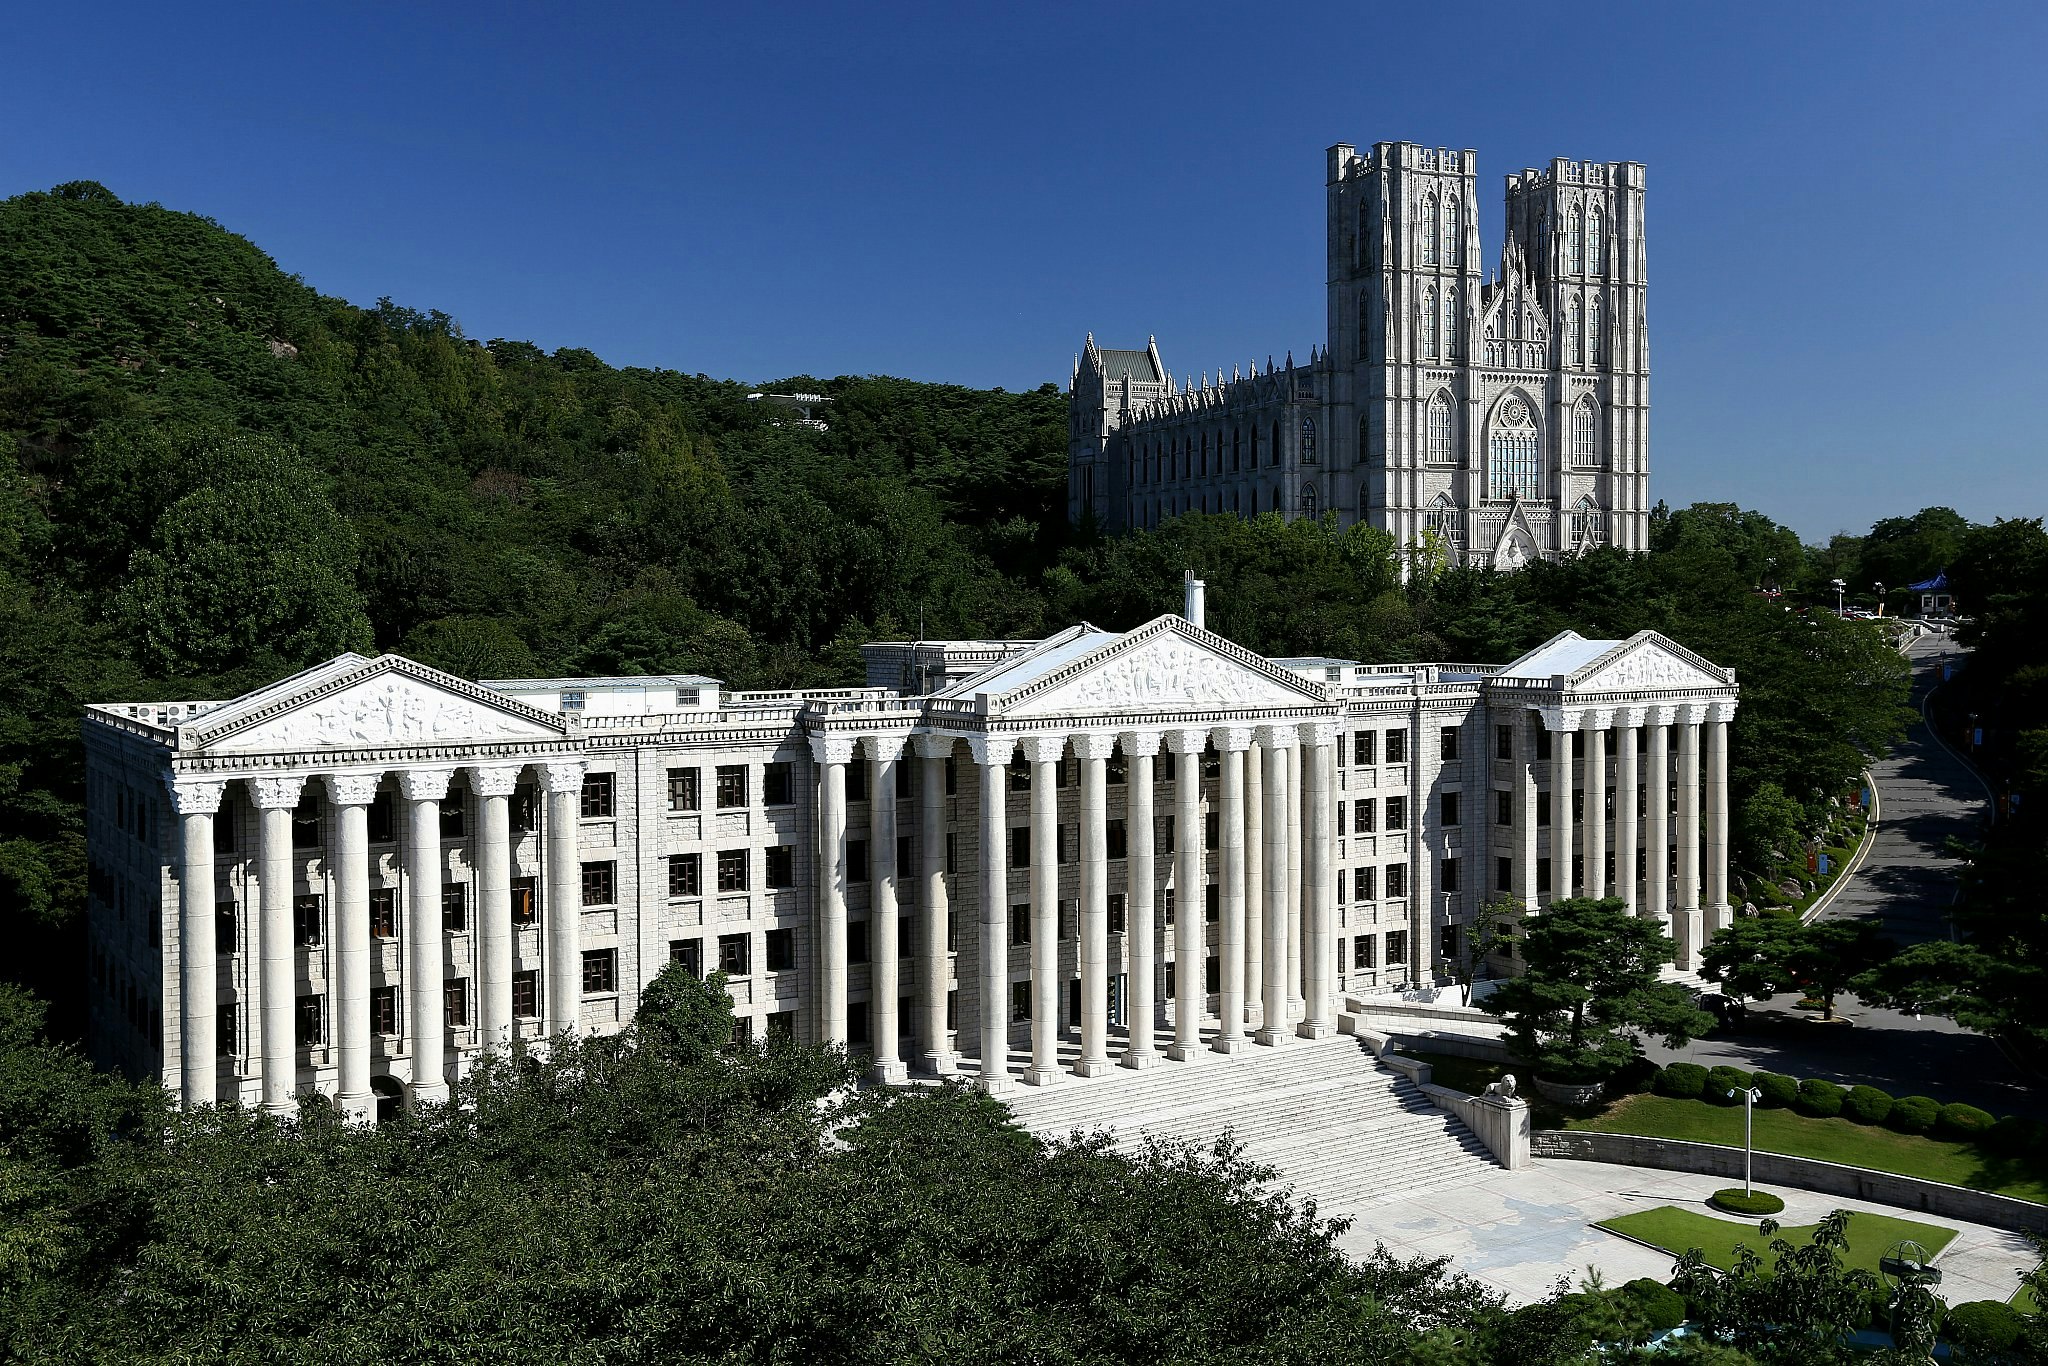 A pair of buildings on the Kyung Hee University campus in Seoul, South Korea: the white, colonnaded University Administration Building, reminiscent of a Greek temple, in the foreground, with the ornate Grand Peace Hall behind, resembling a cathedral. 